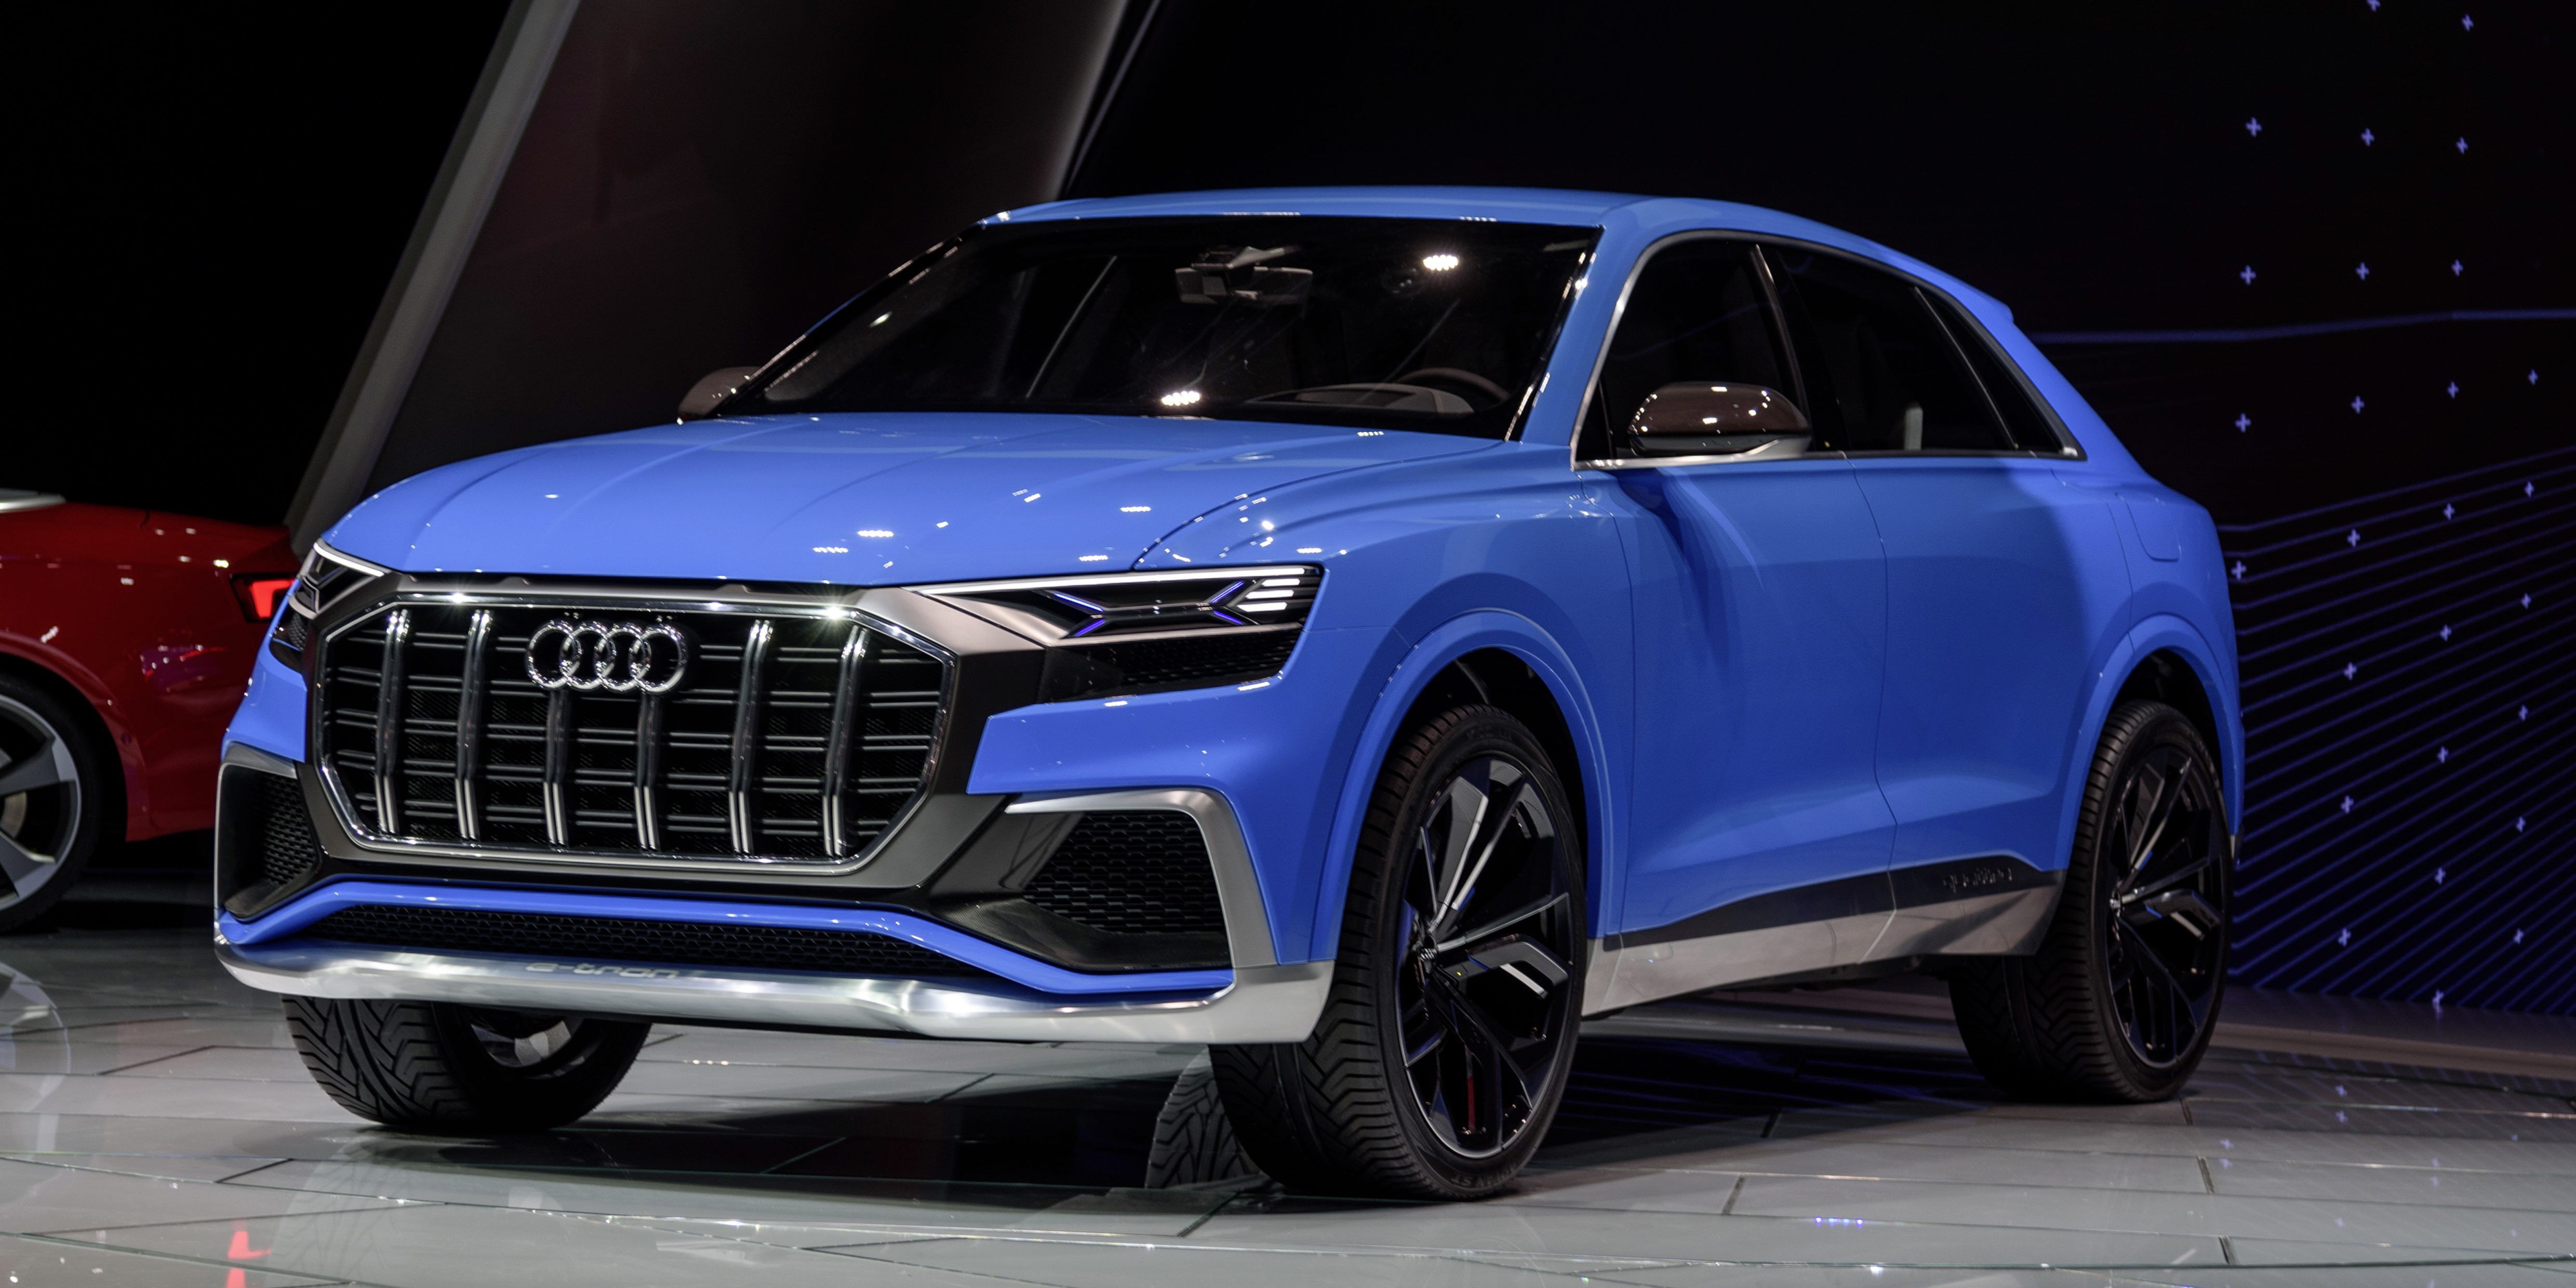 Audi unveils new plugin electric Q8 SUV ahead of fullyelectric